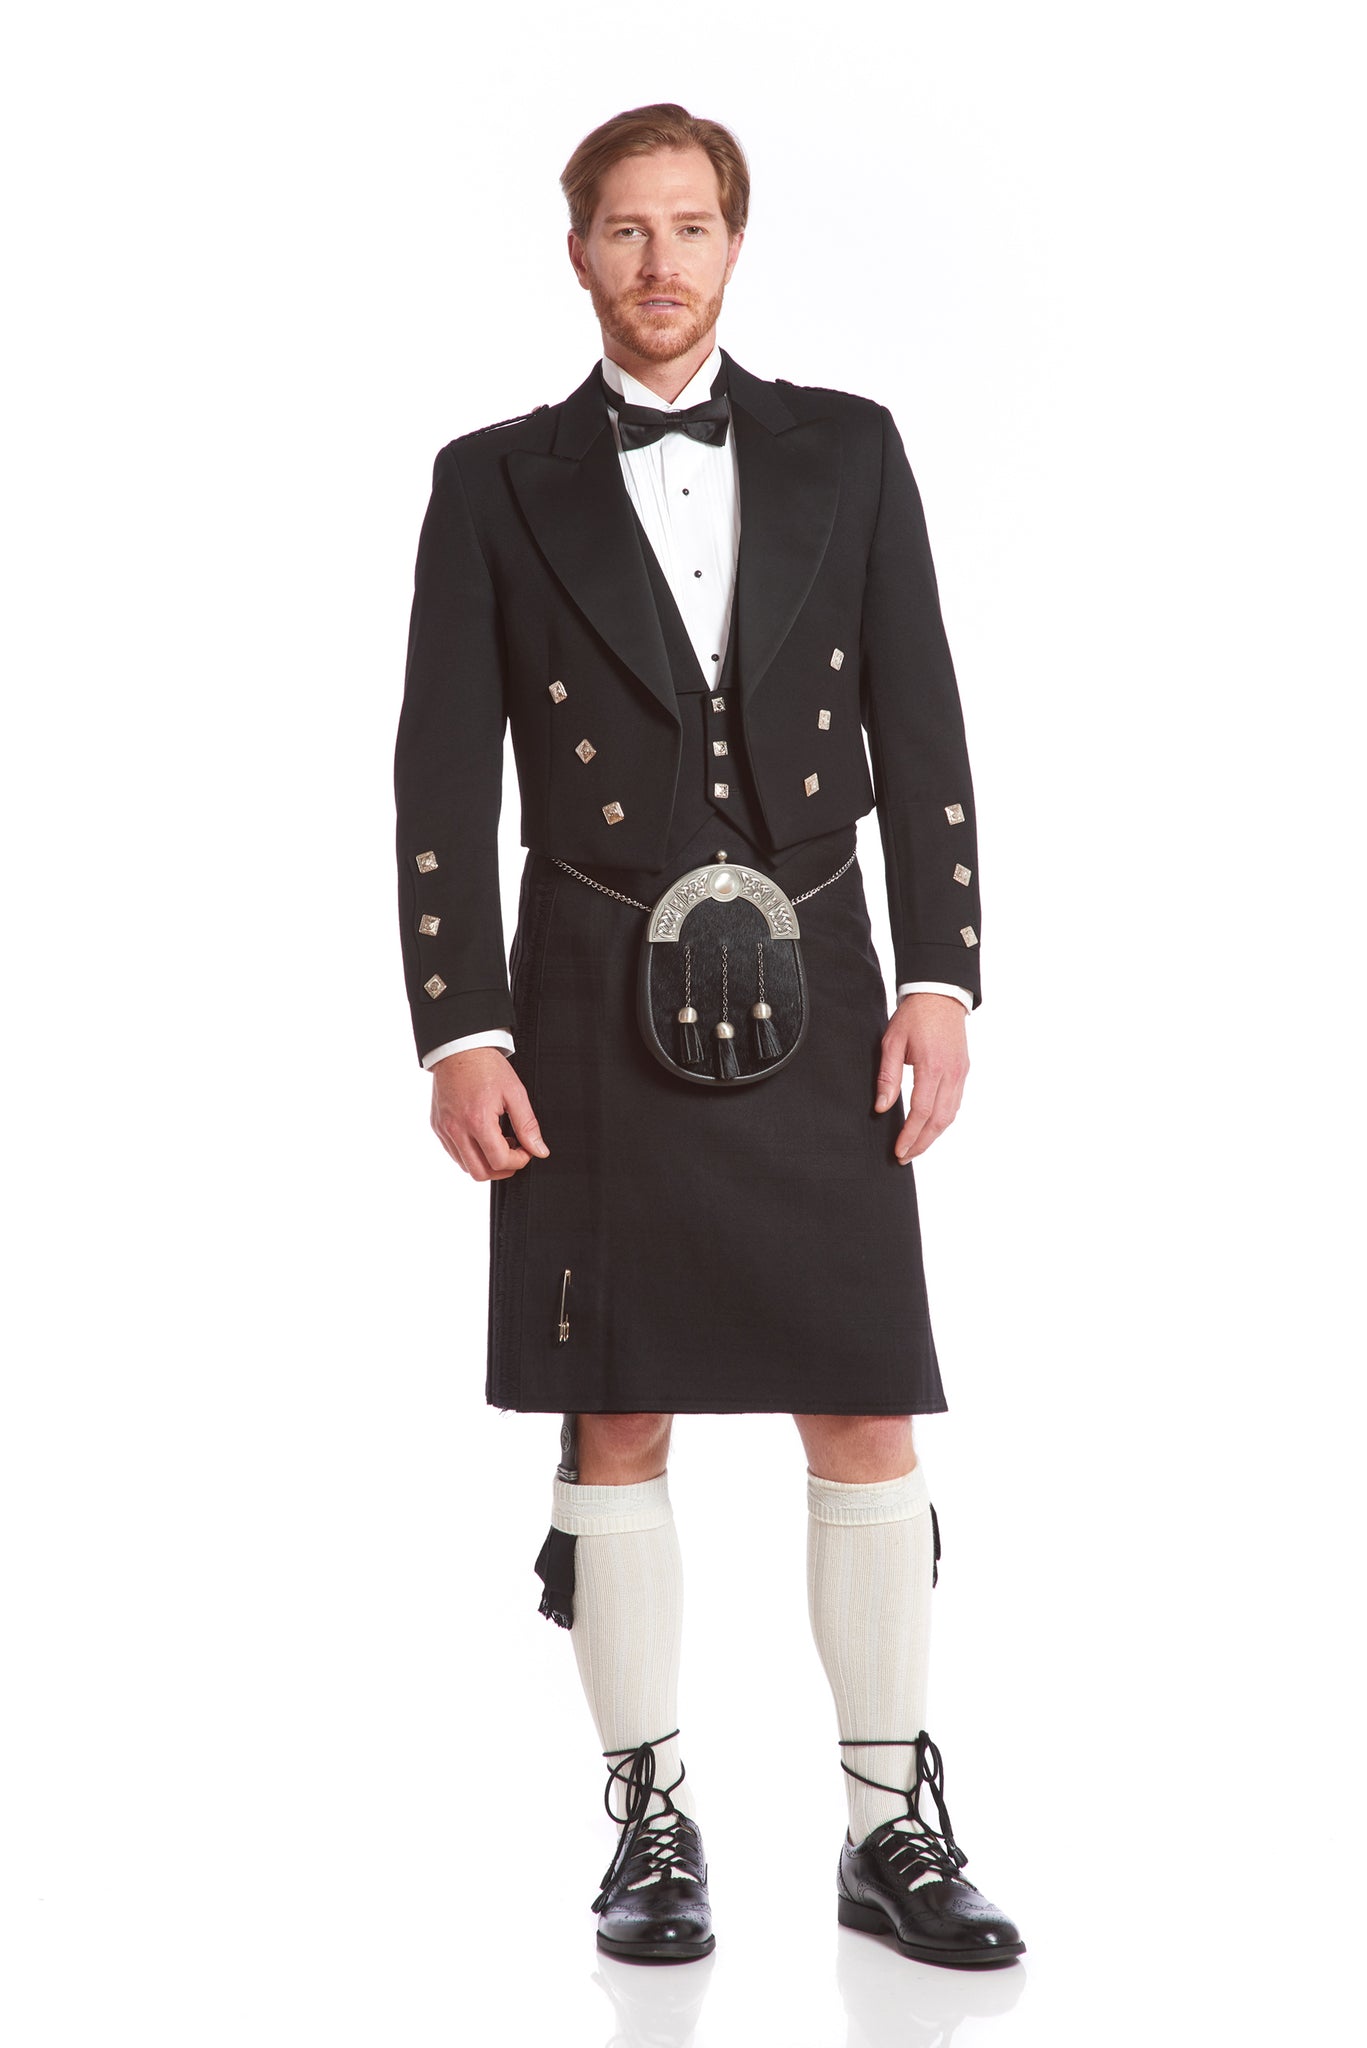 Prince Charlie Deluxe Kilt Package – The Scottish Company